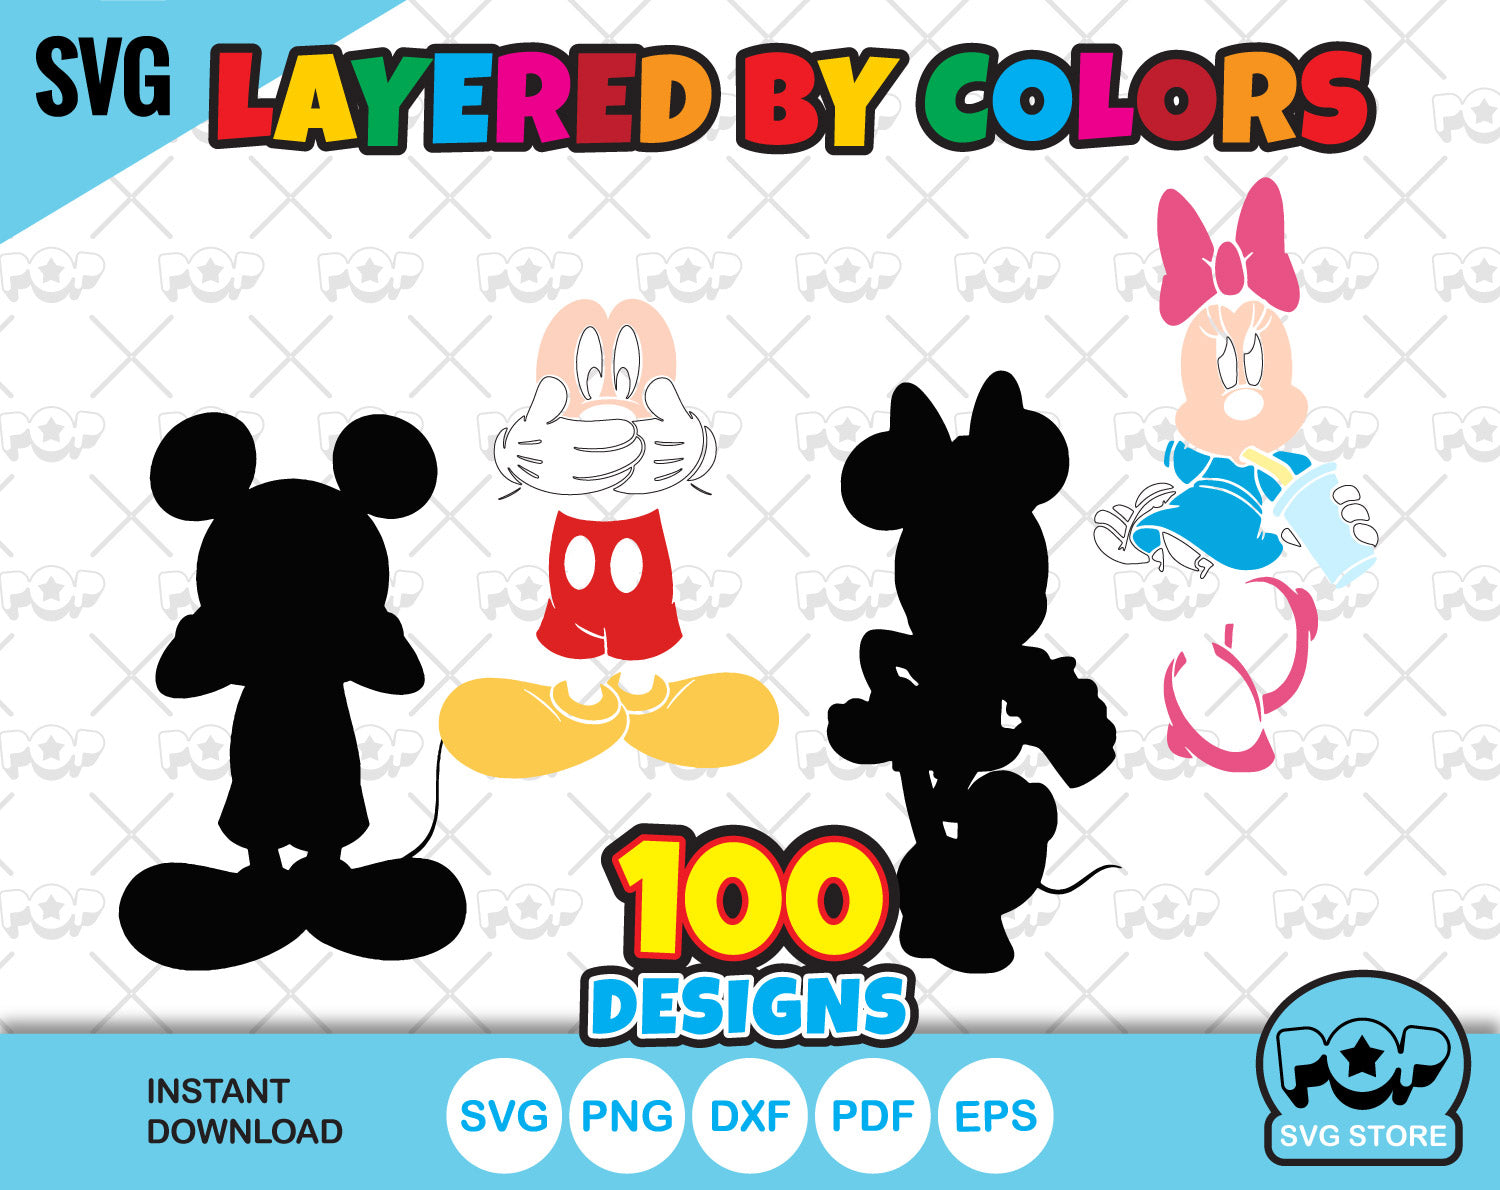 Valentine's - Mickey Mouse And Disney Friends PNG - Instant Download